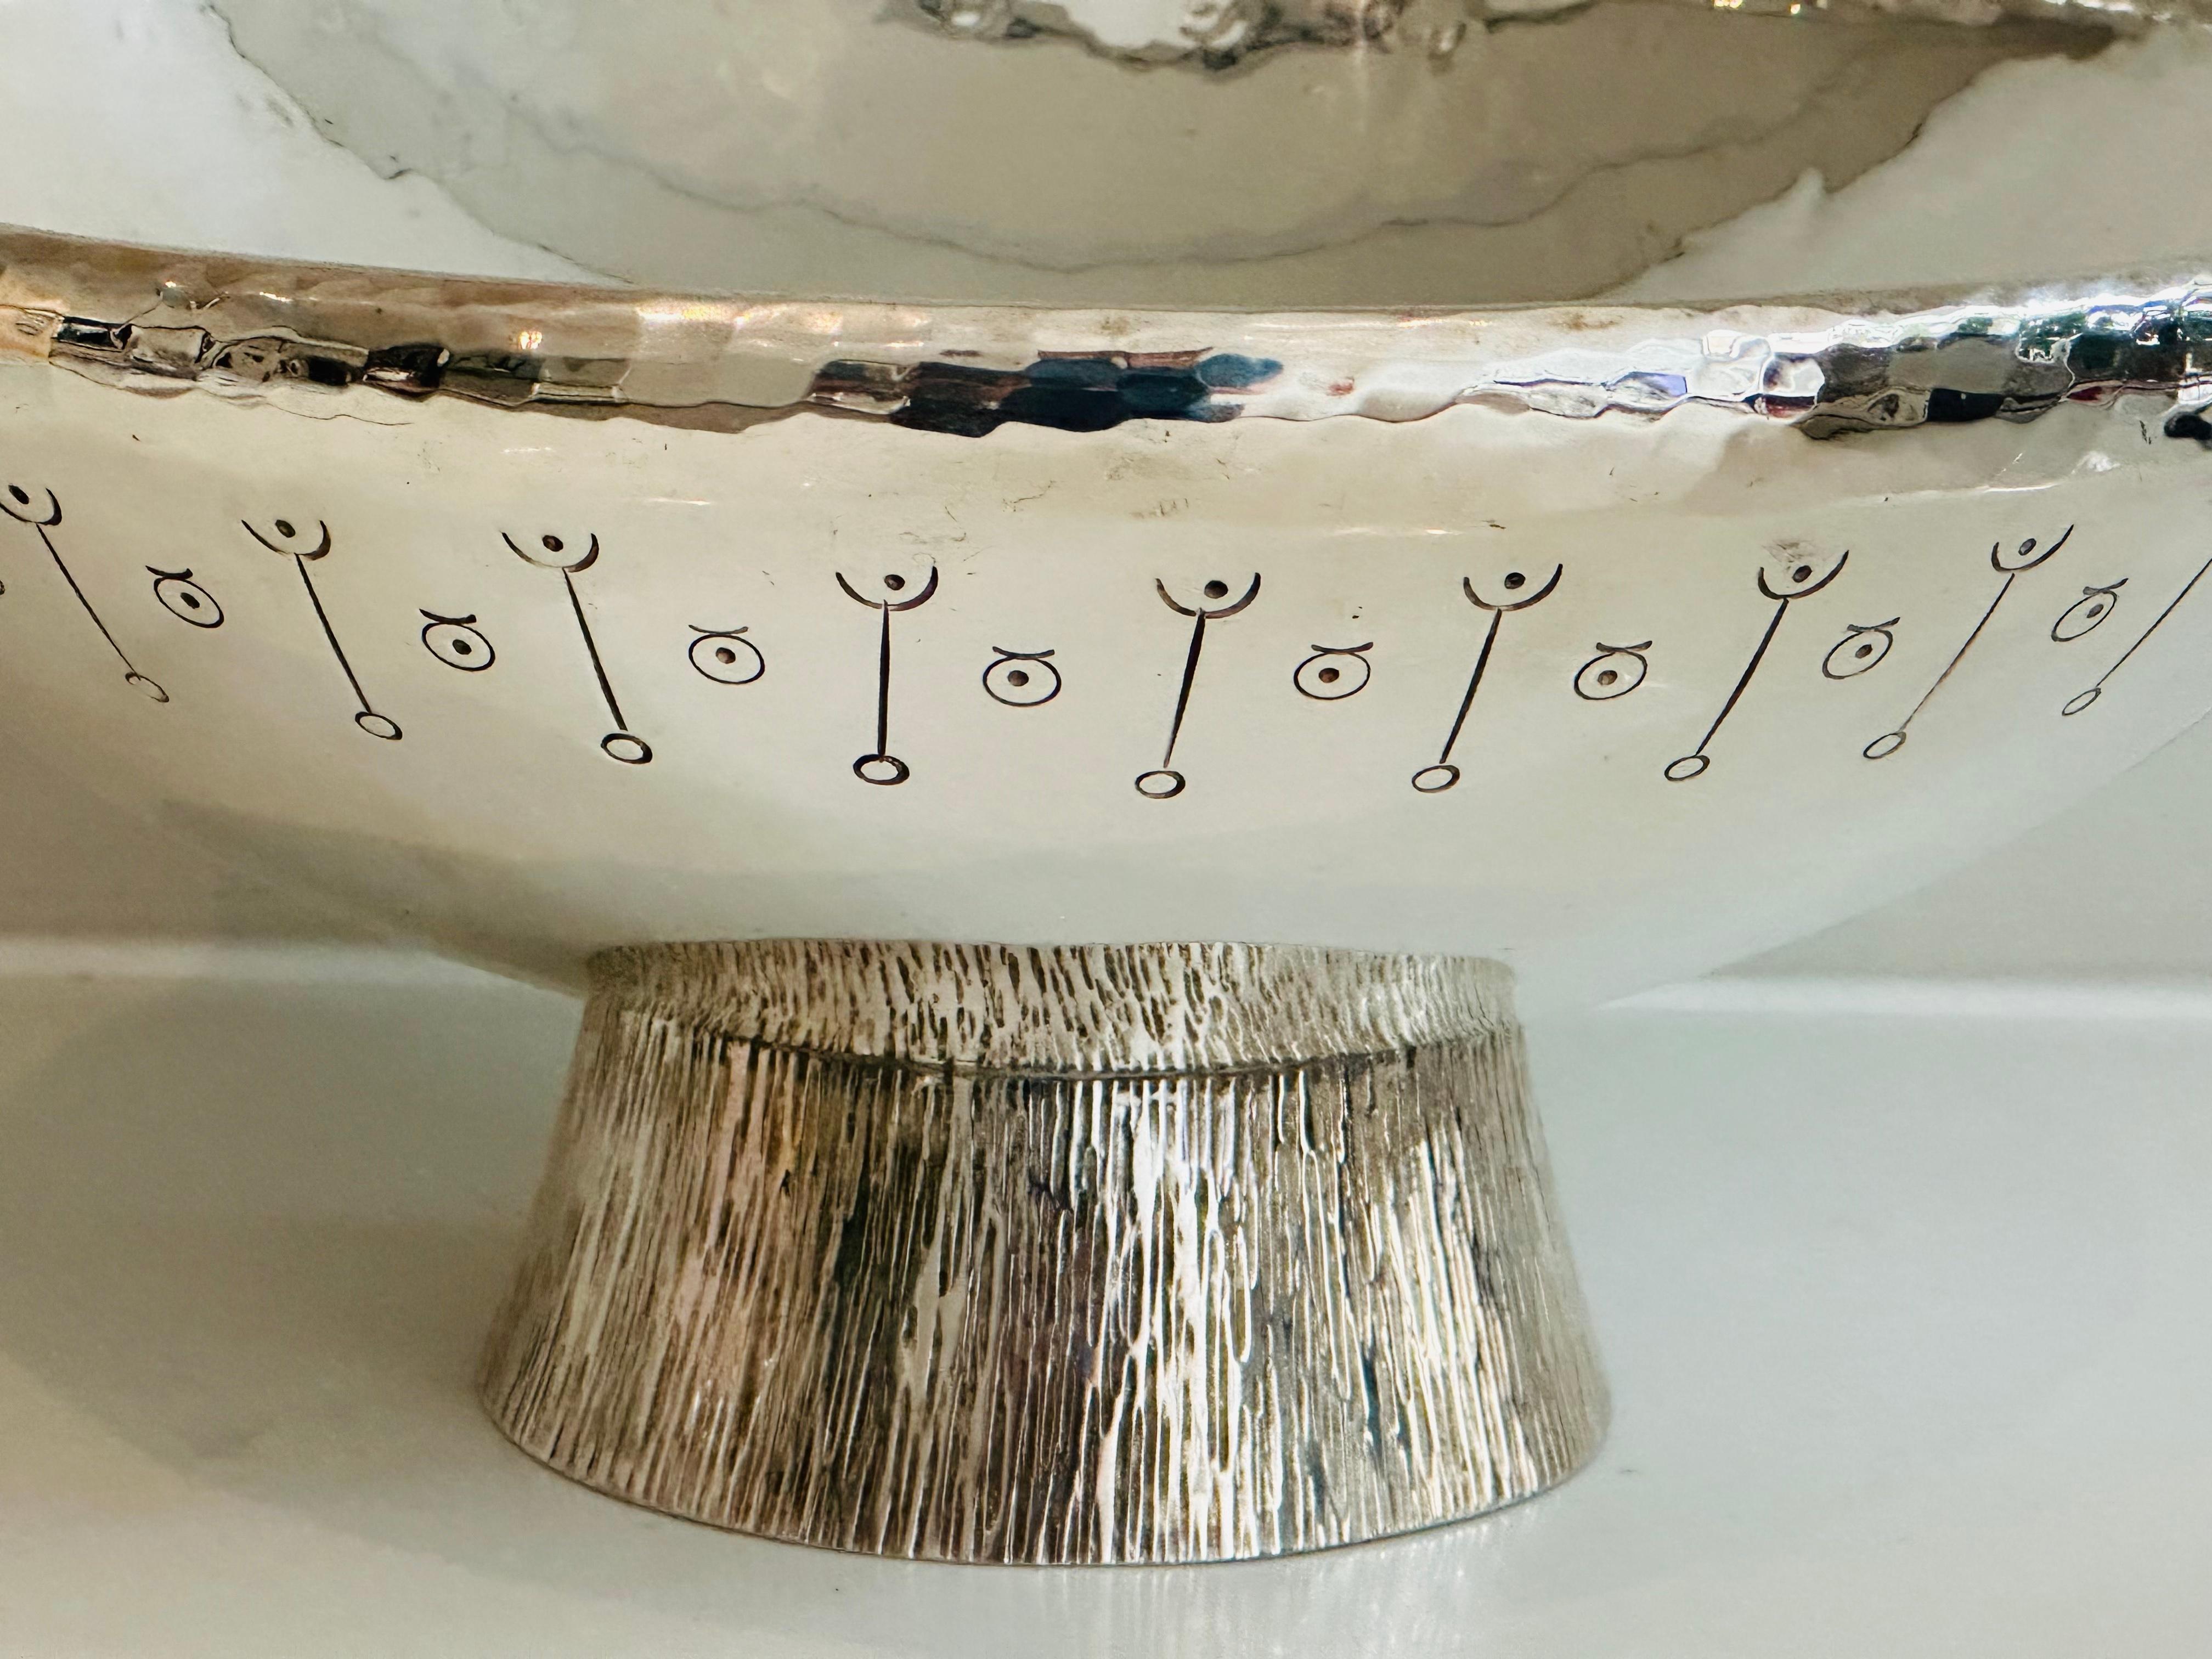 1980s English Silver Plated Decorative Hand-Hammered Serving or Display Bowl For Sale 10